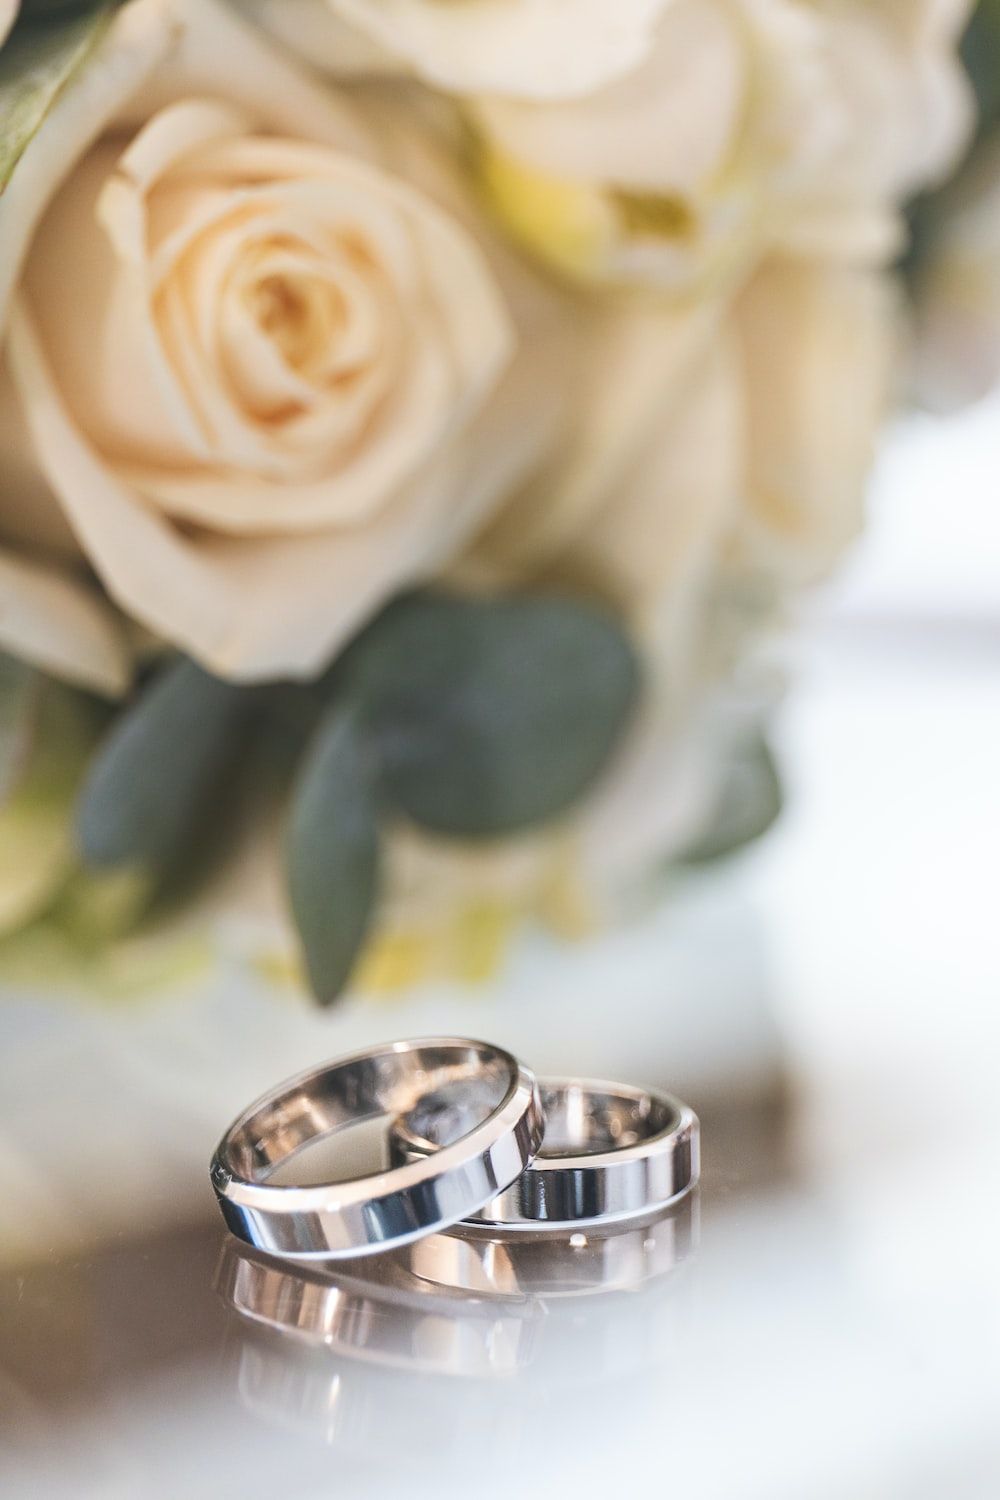 Two silver wedding rings on a white surface with a bouquet of white roses in the background. - Wedding